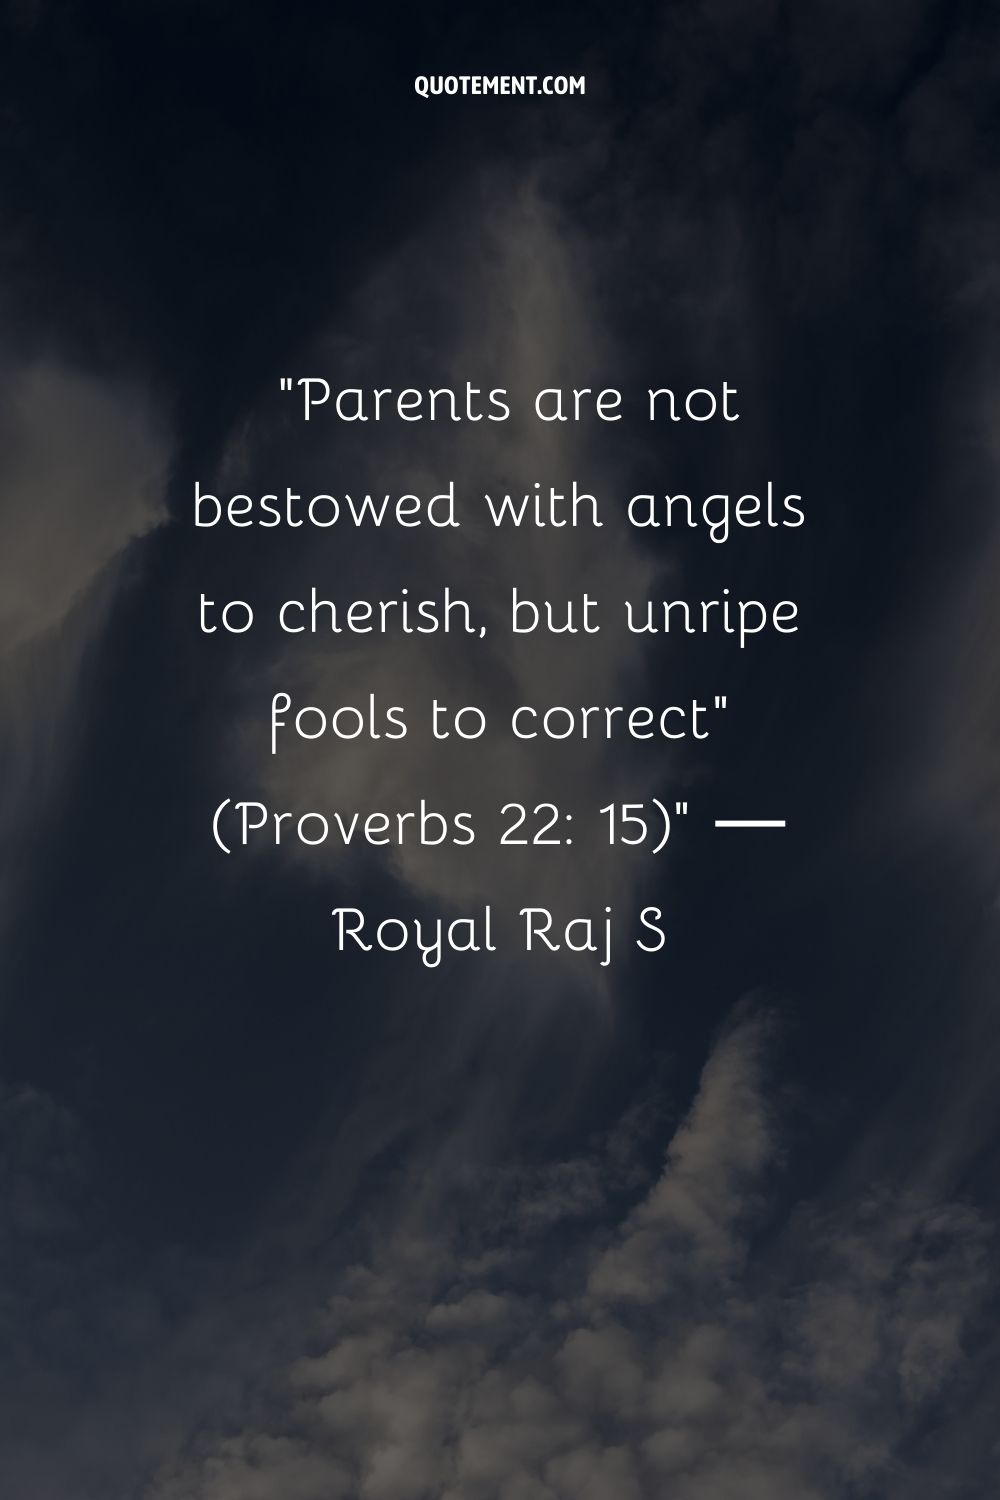 Parents are not bestowed with angels to cherish, but unripe fools to correct